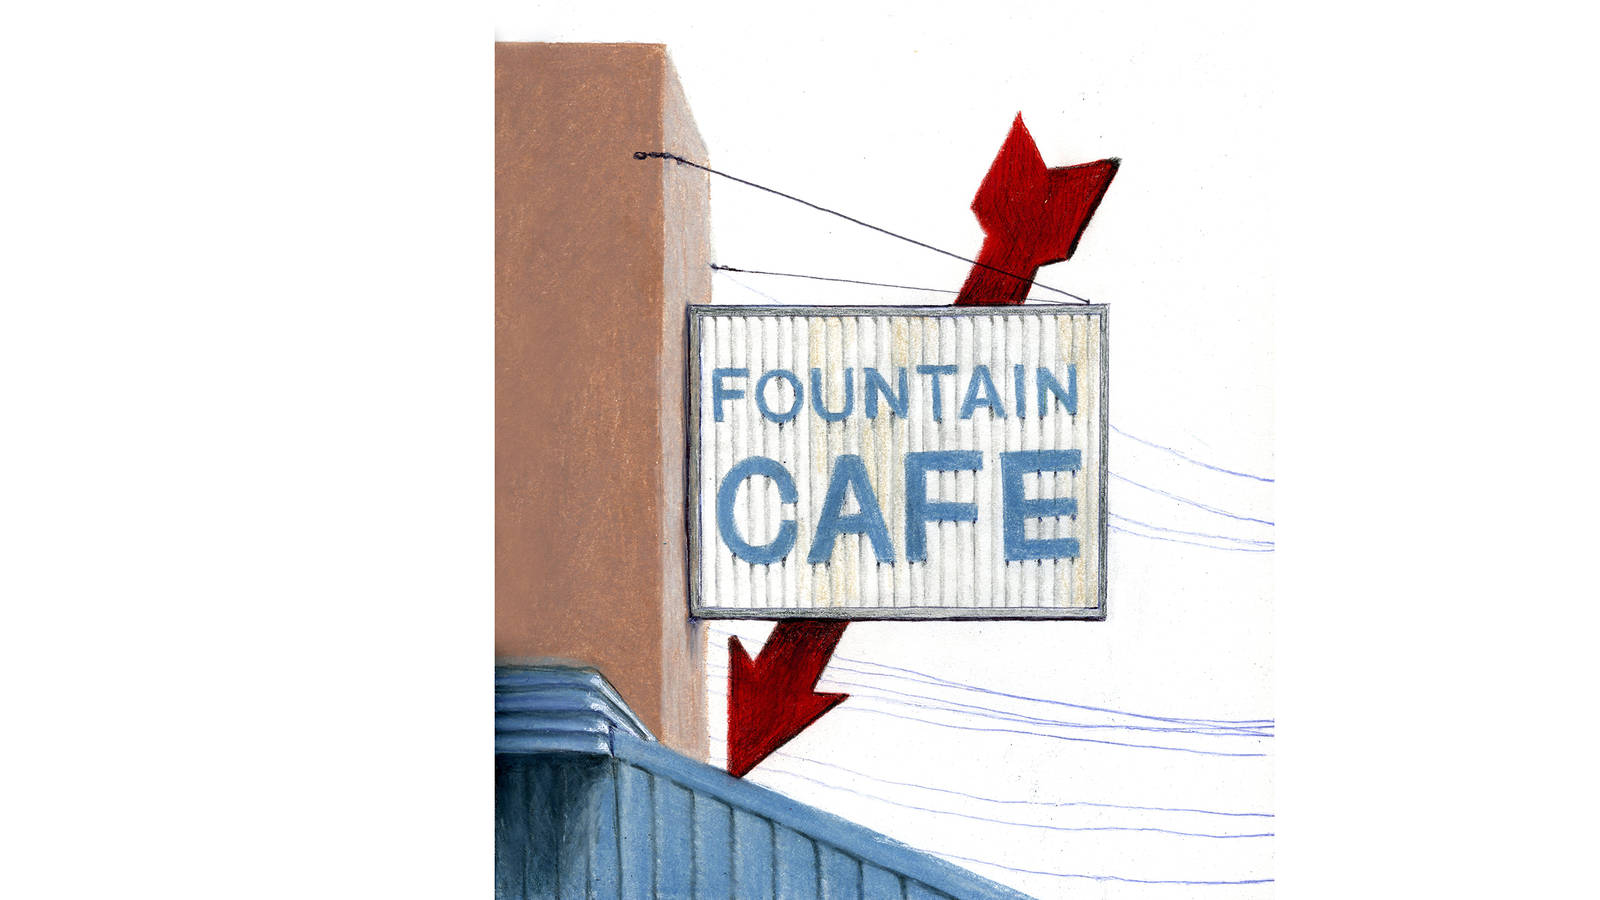 <h3 style="text-align: center; padding: 50px;"><span class="text-Intro-style">A vintage sign along Central Avenue in Hot Springs, Arkansas, the town that has been home to Hot Springs National Park for nearly 100 years. Colored pencil and ink on paper, 2016.</span></h3>